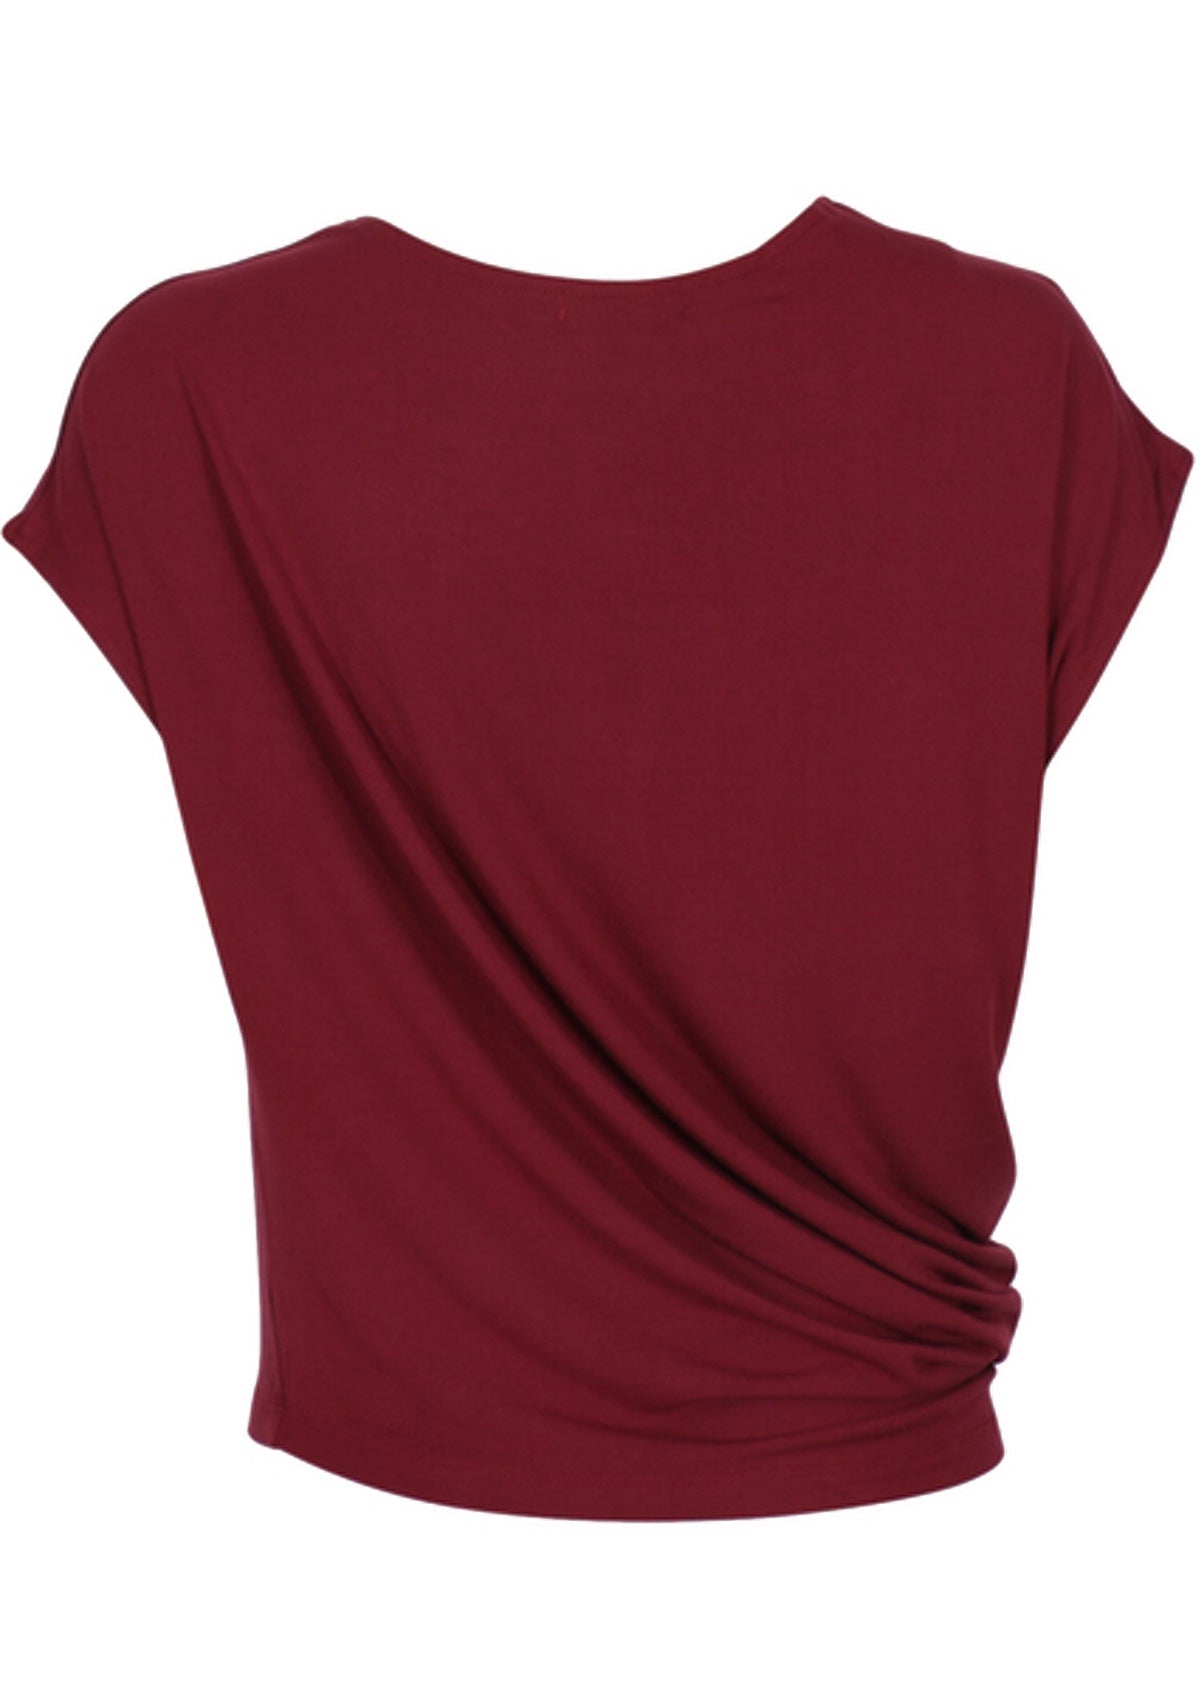 back view maroon stretch rayon womens top